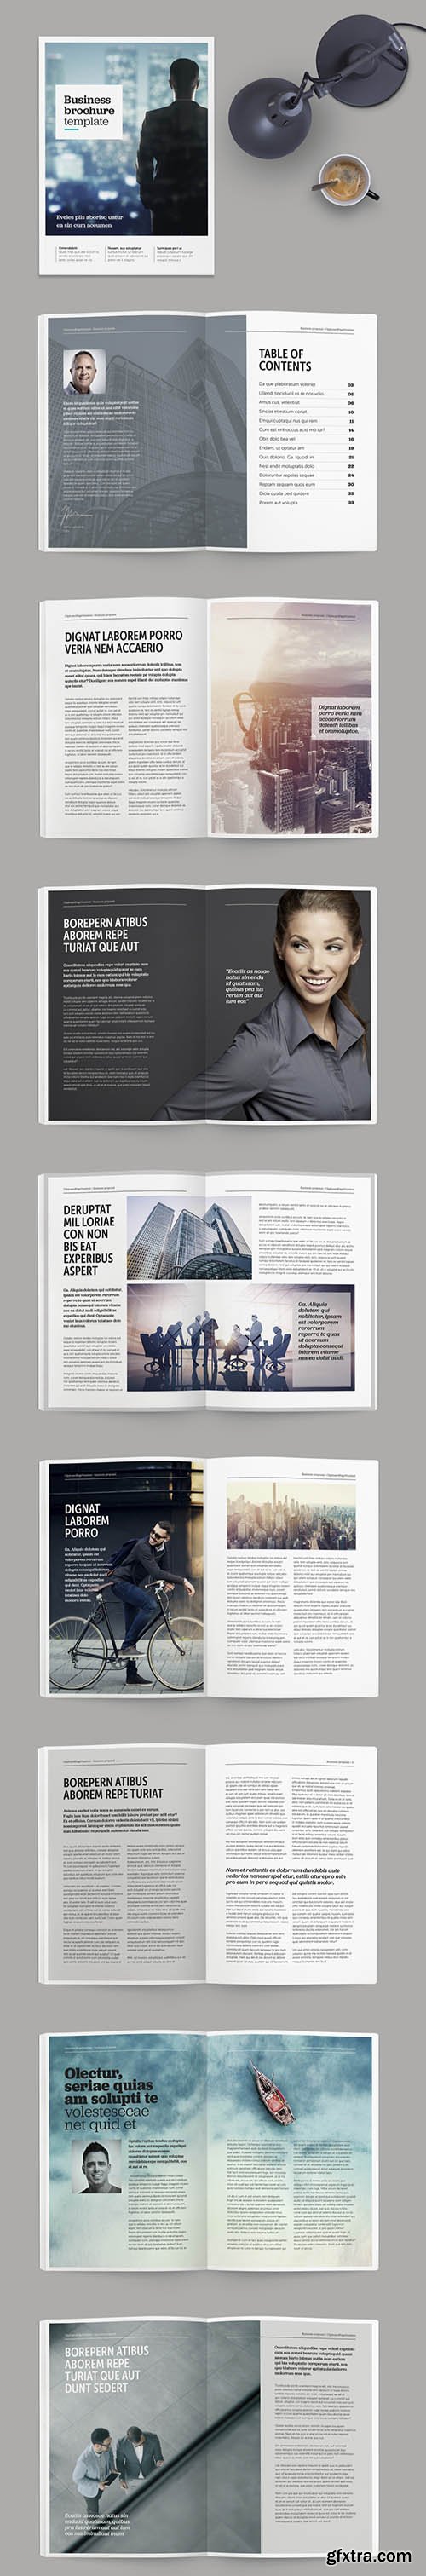 Brochure/Magazine Layout with Bold Title Treatments 222543725